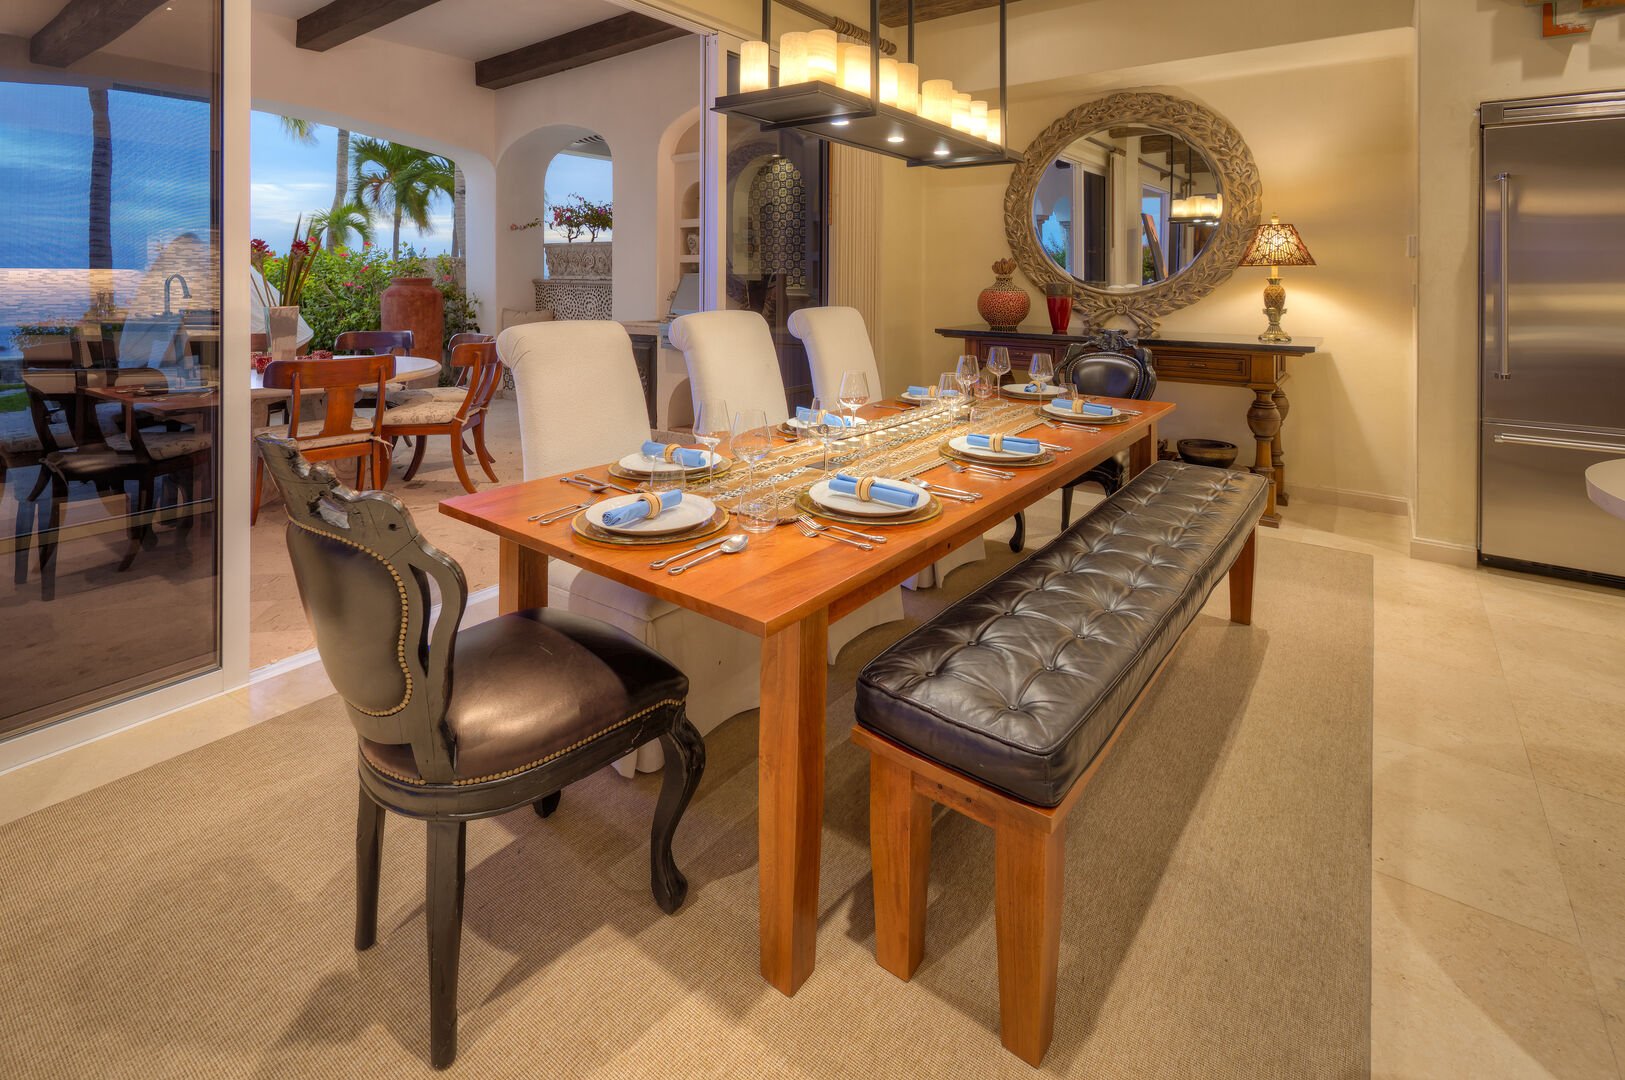 Dining table, chairs, mirror, refrigerator, and sliding glass doors to the terrace